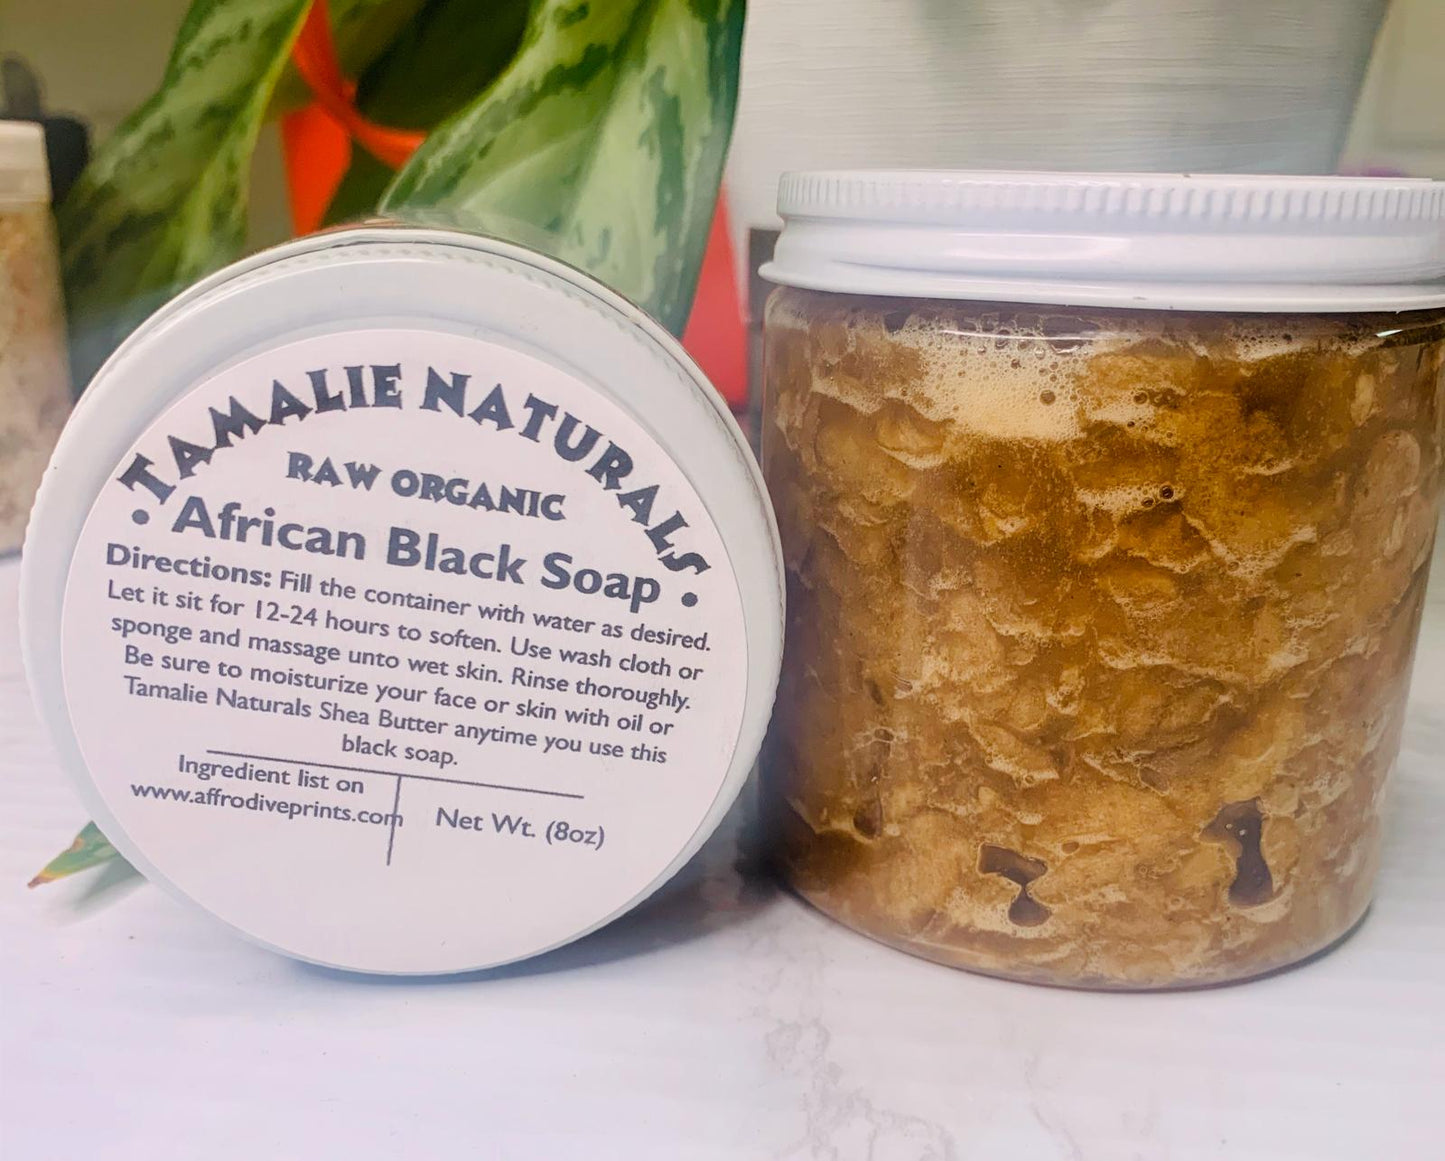 New African Black Soap, Natural,Promotes Skin Health,Made in Ghana.